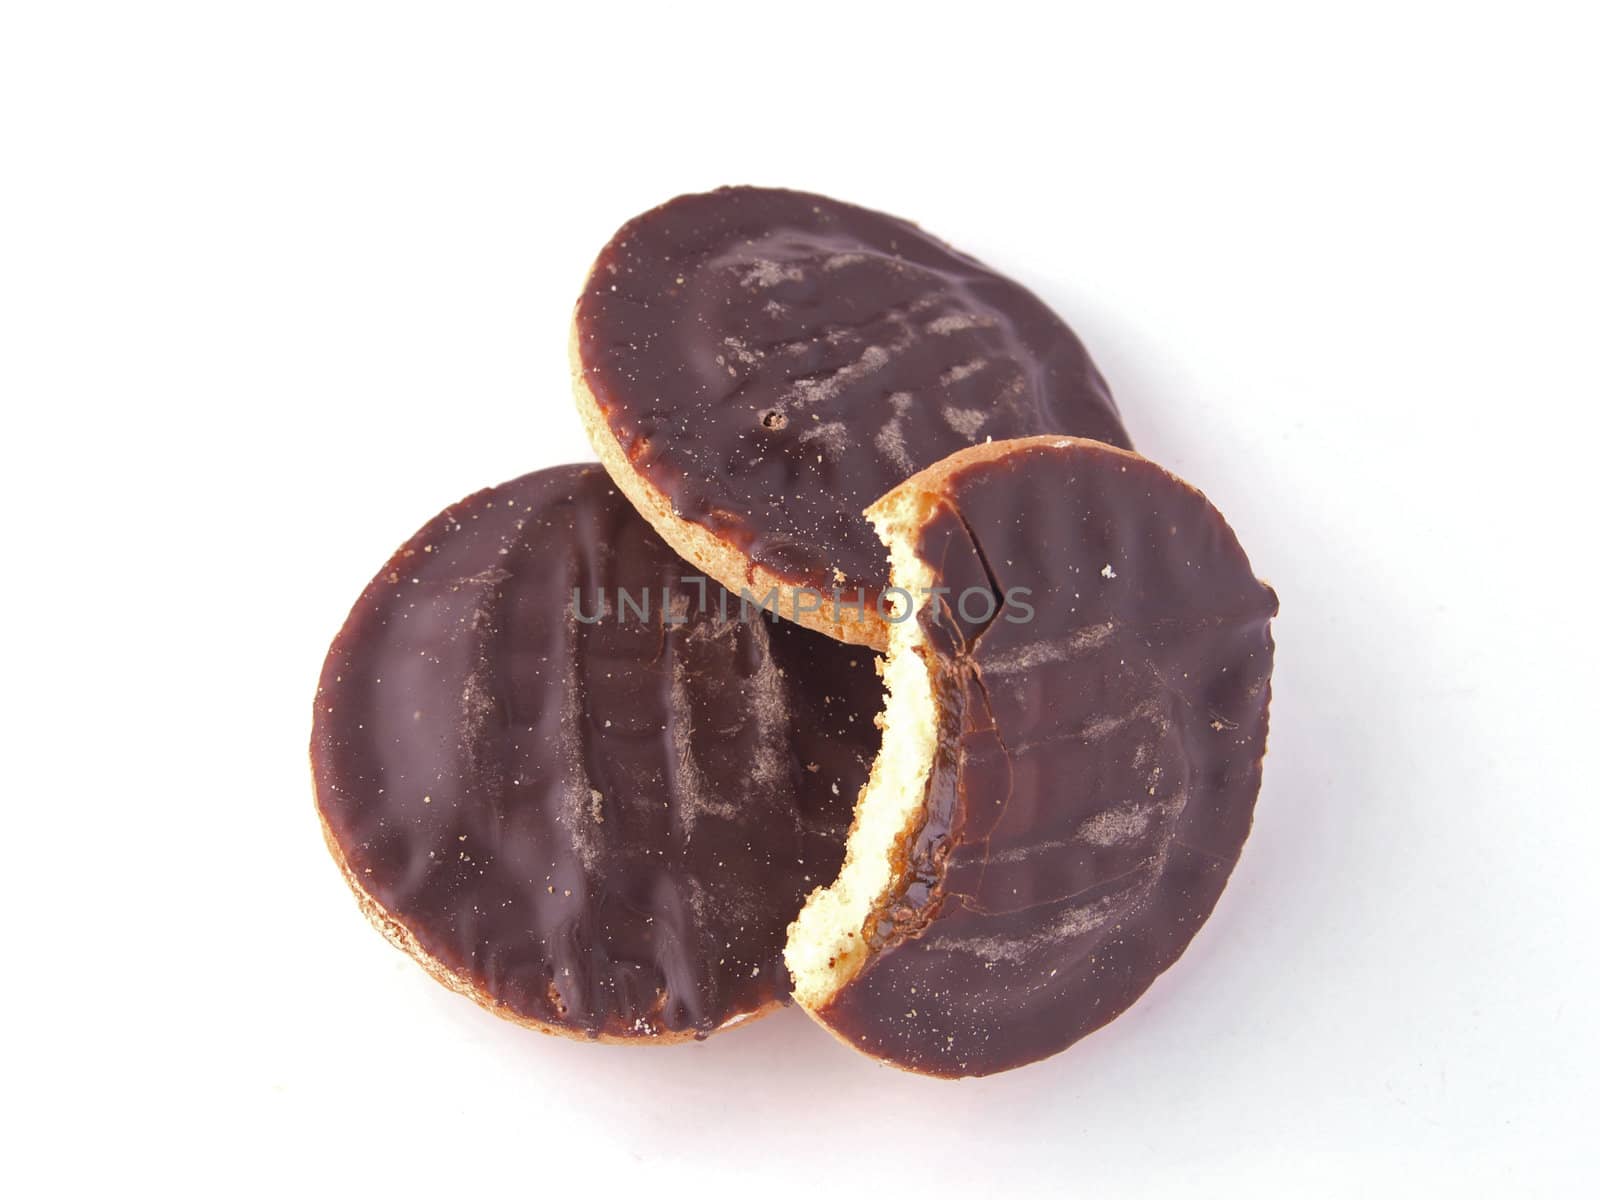 Chocalate biscuits on a white background